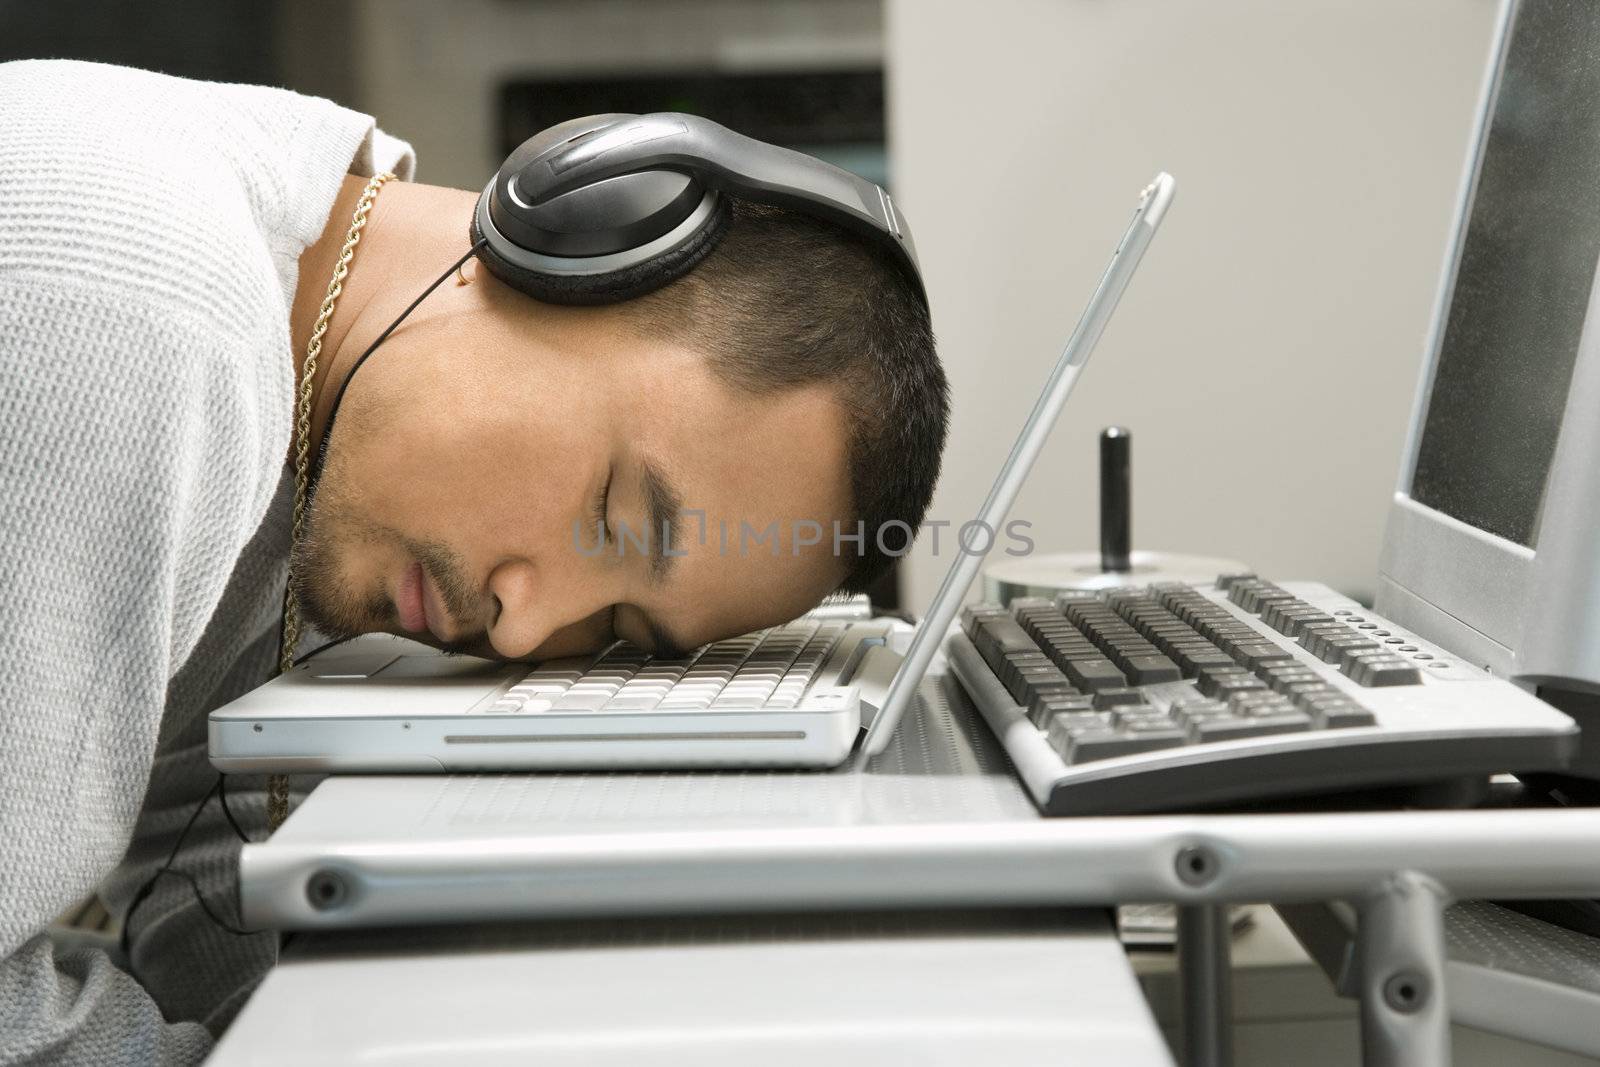 Close-up of Asian young adult man sleeping with head on laptop keyboard and wearing headphones.